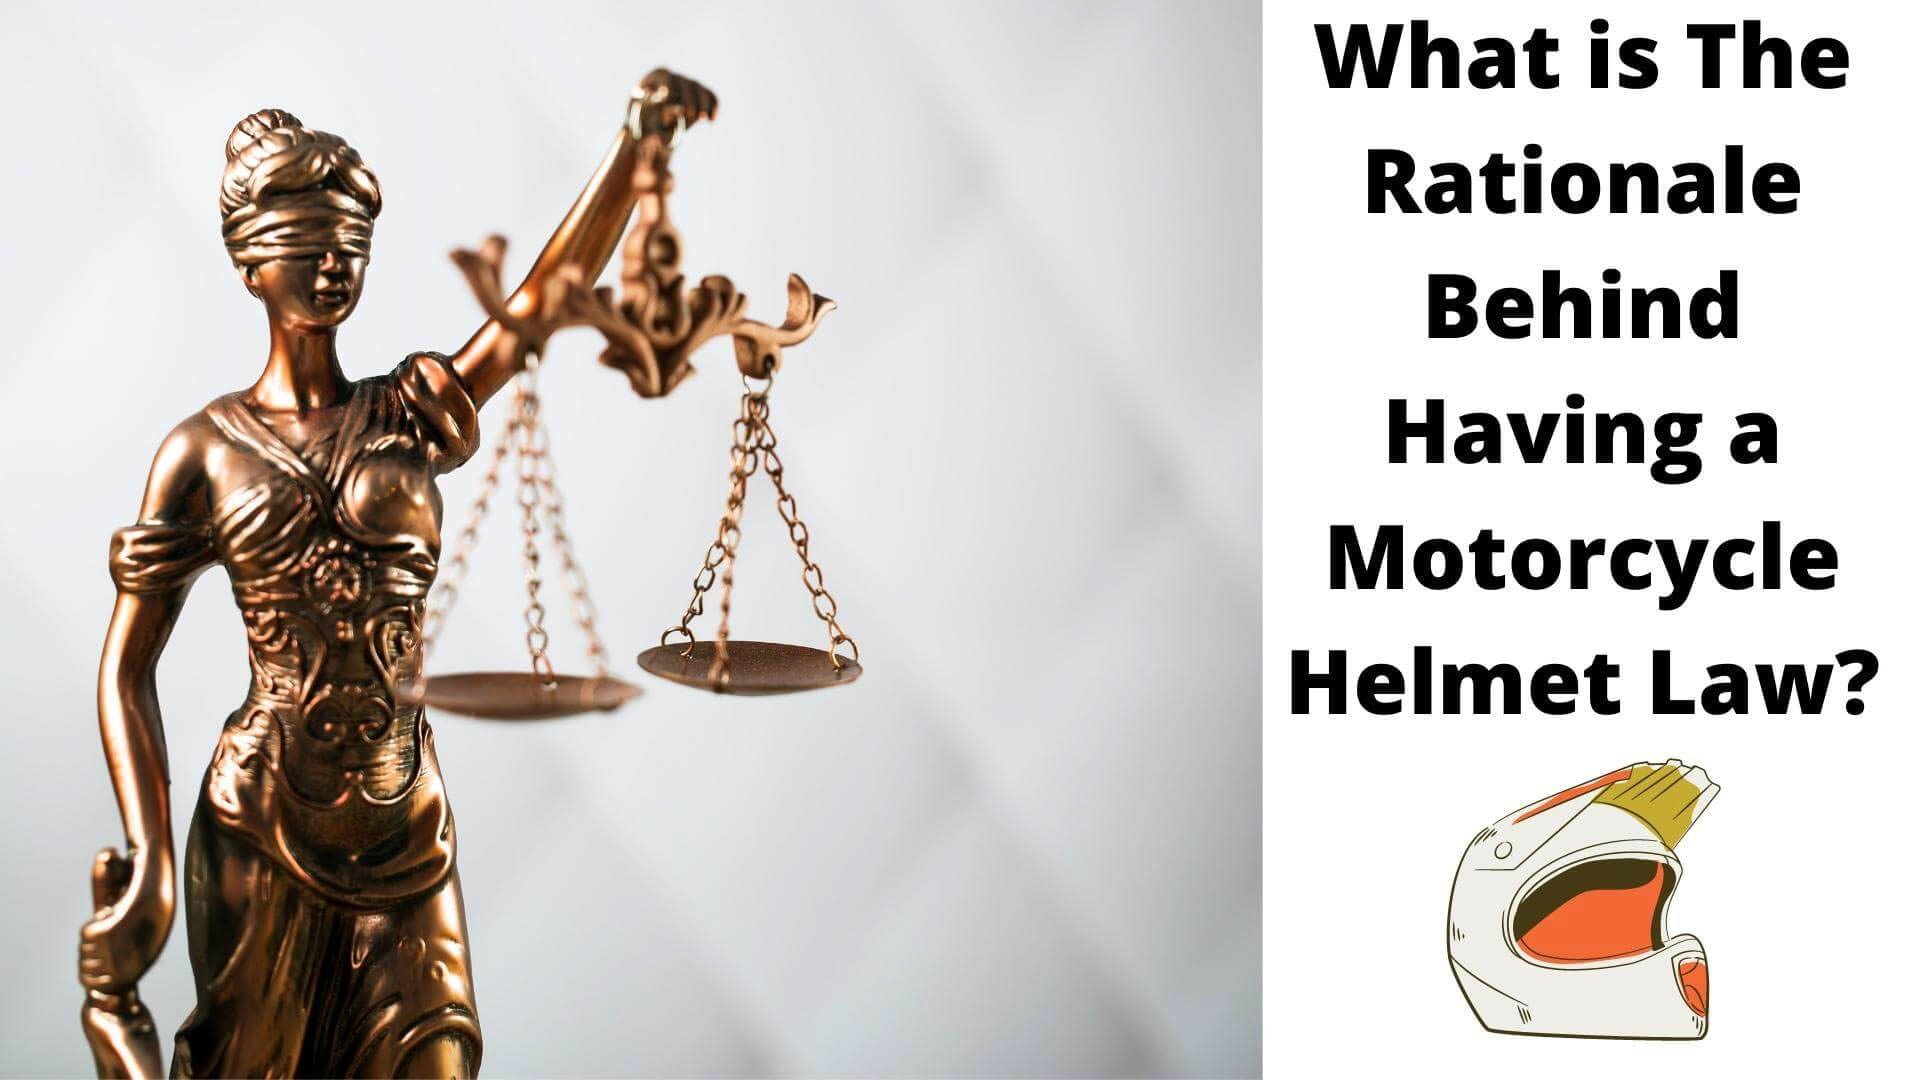 What Is The Rationale Behind Having A Motorcycle Helmet Law?